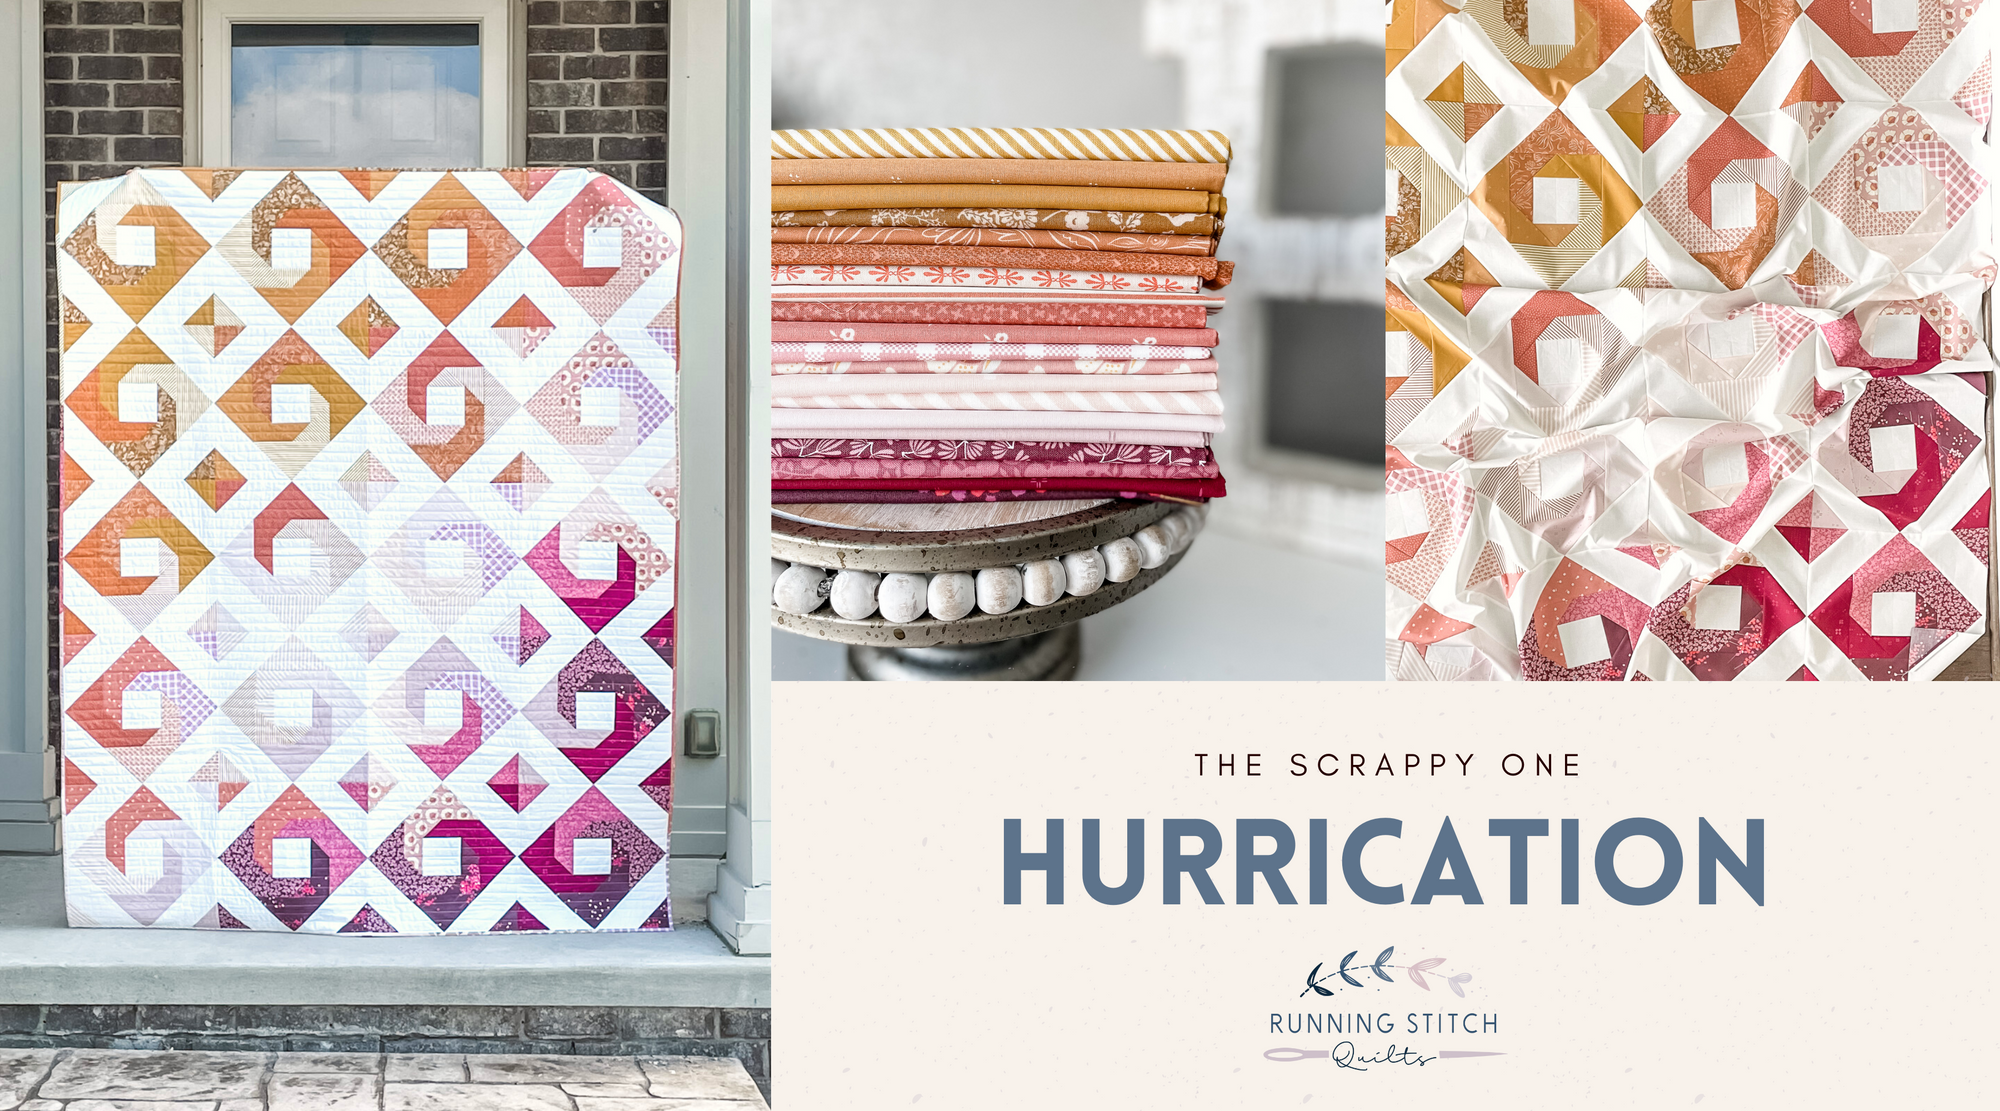 Hurrication - the Scrappy One